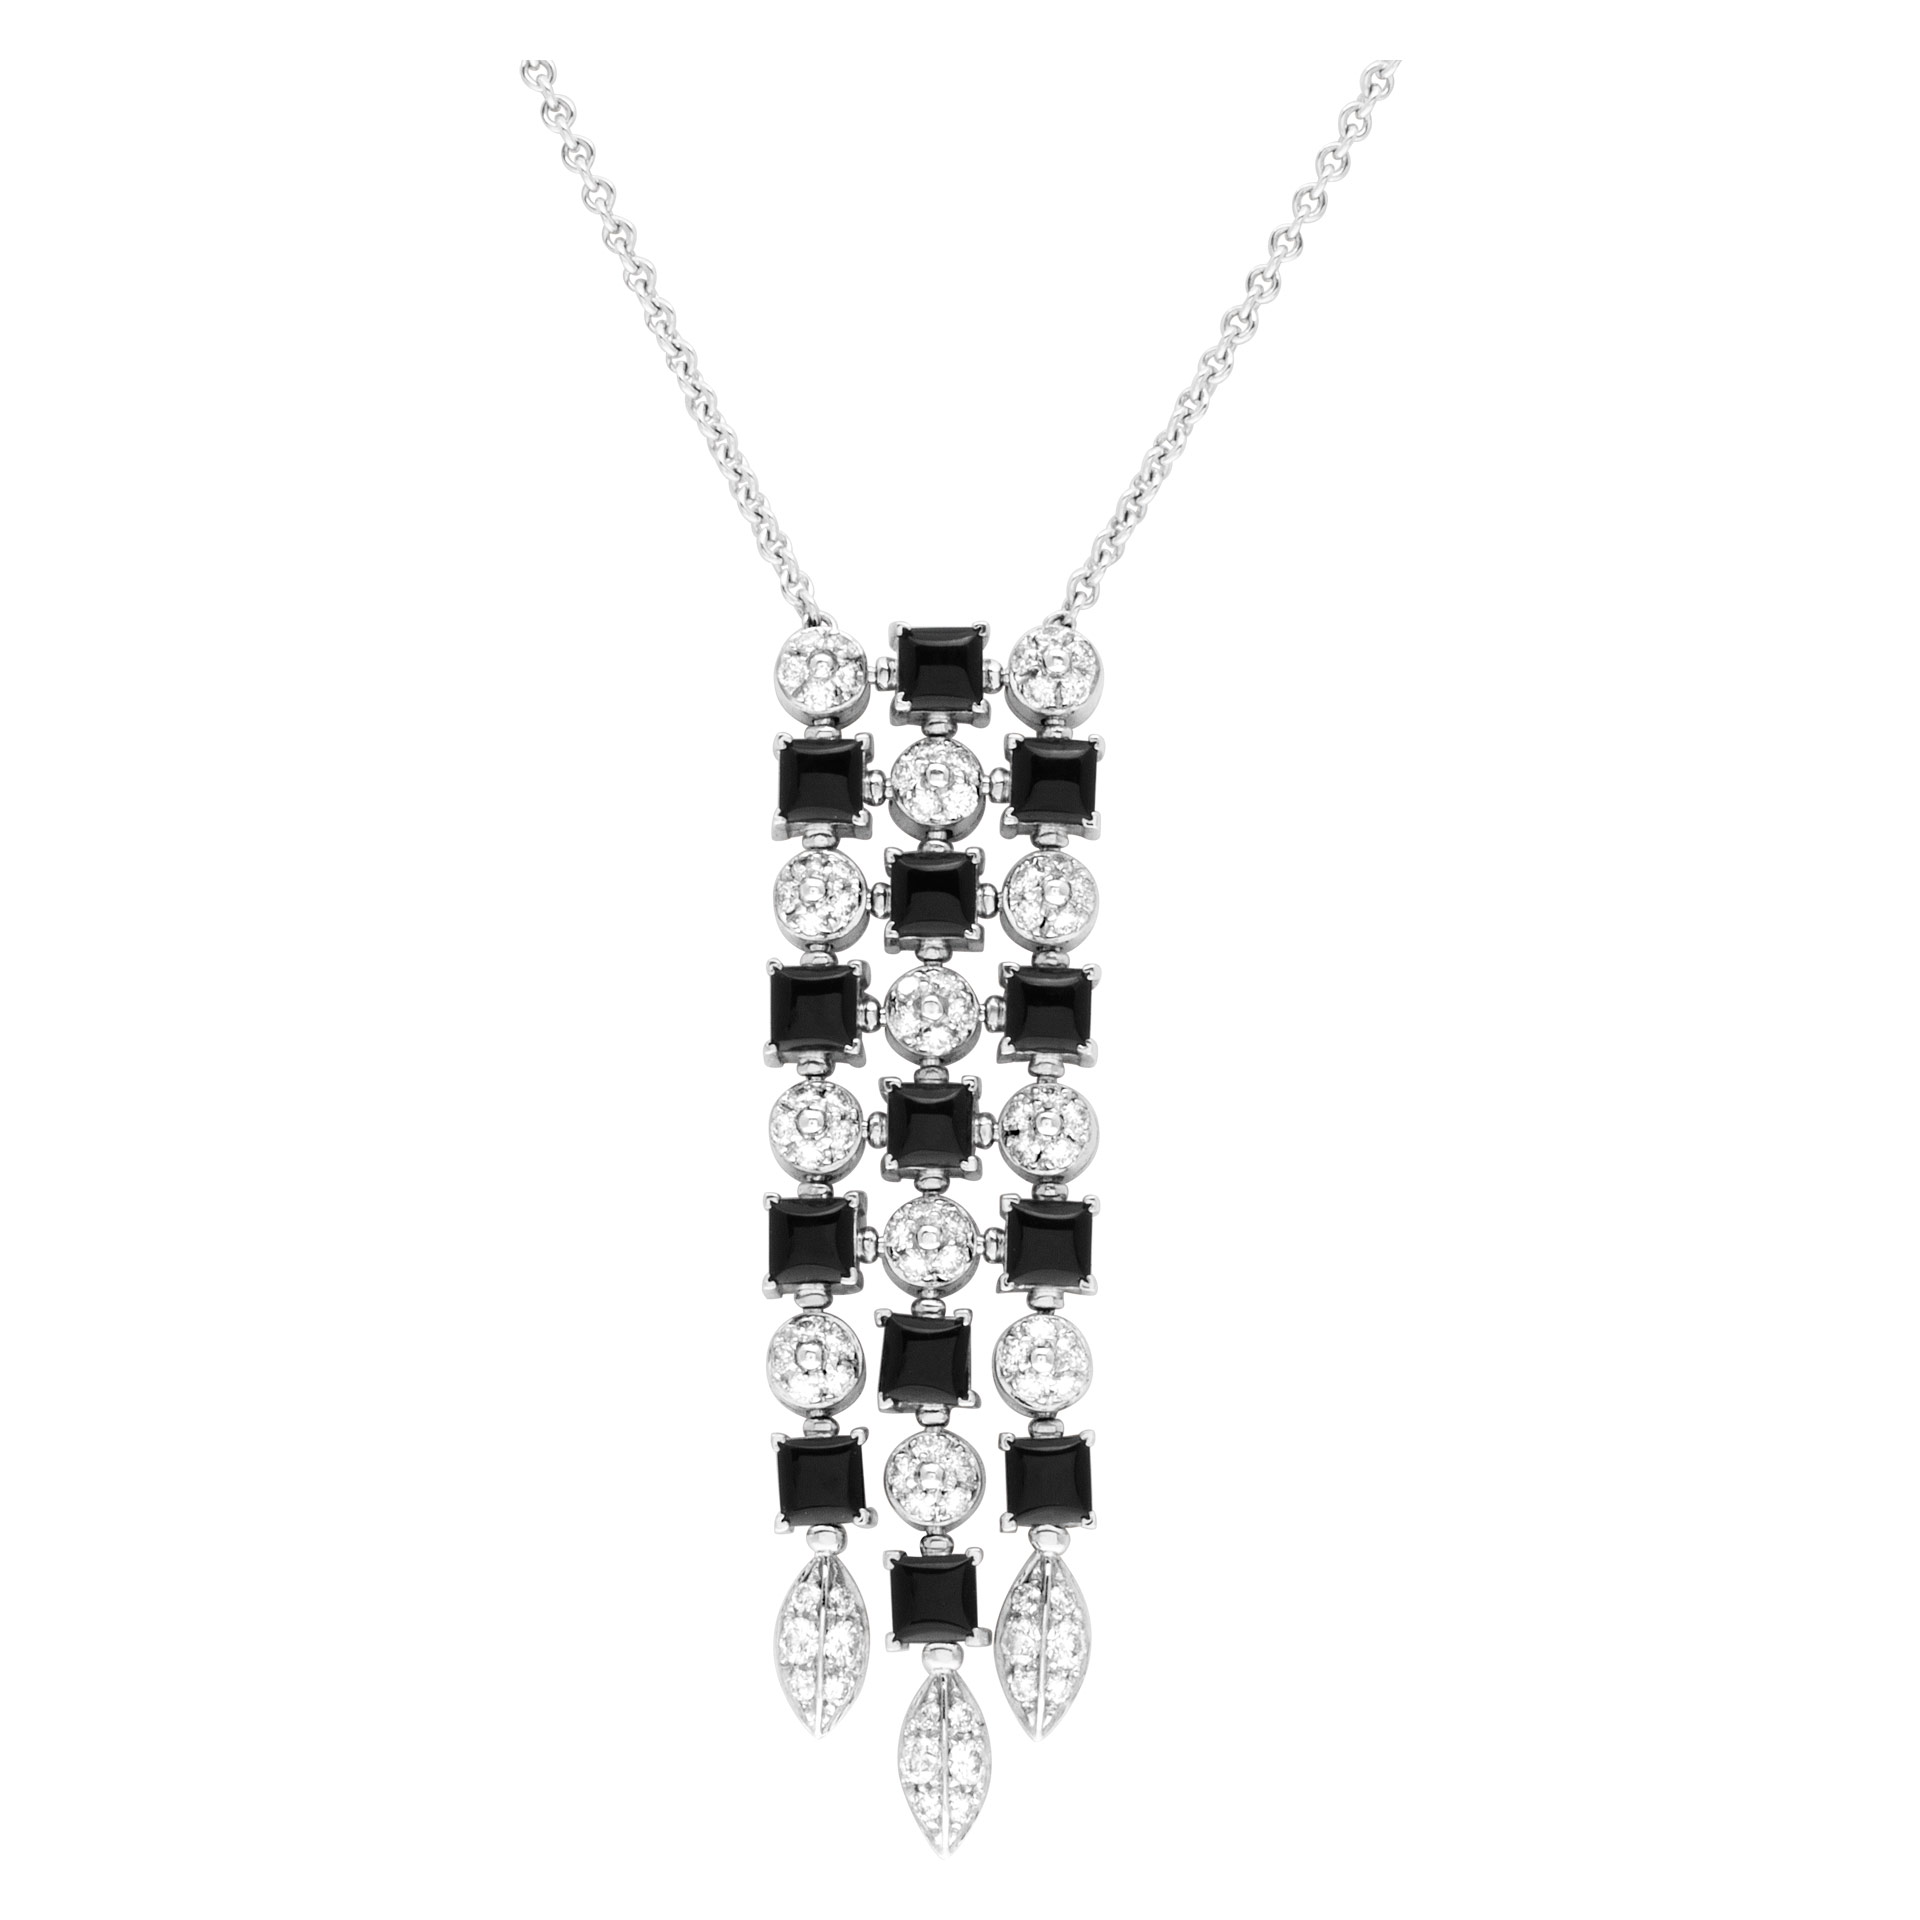 Bvlgari "Lucea" onyx and diamond 1.50ct (G, VS1) necklace in 18k white gold